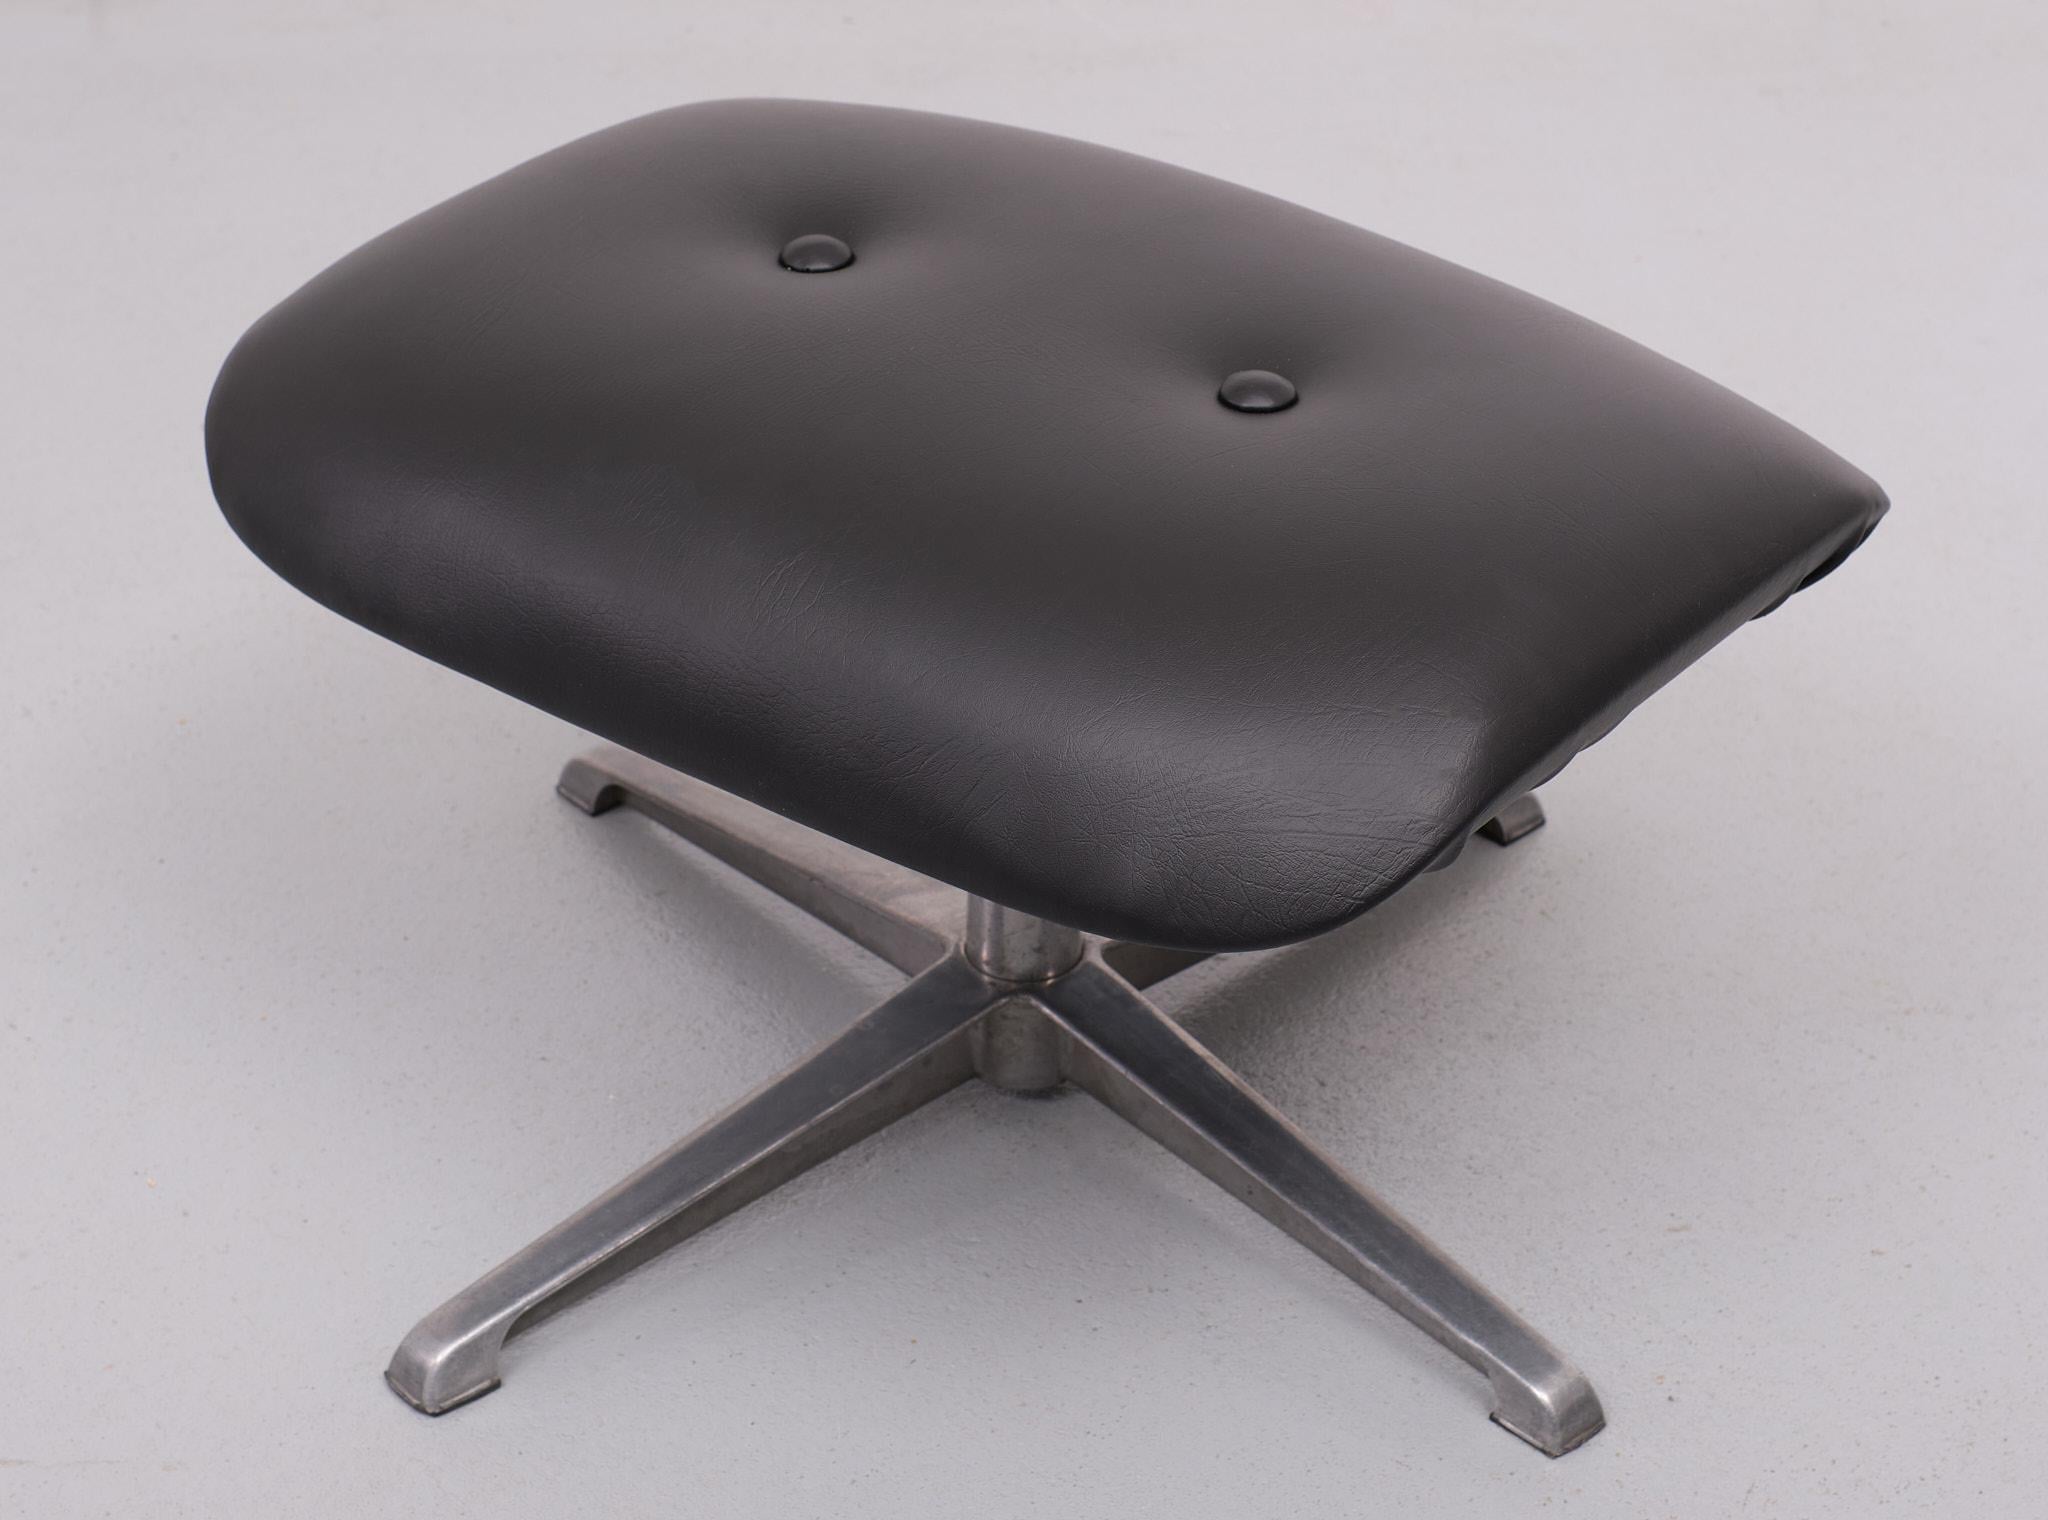 Mid-20th Century Black Faux Leather Ottoman, 1960s, Denmark For Sale